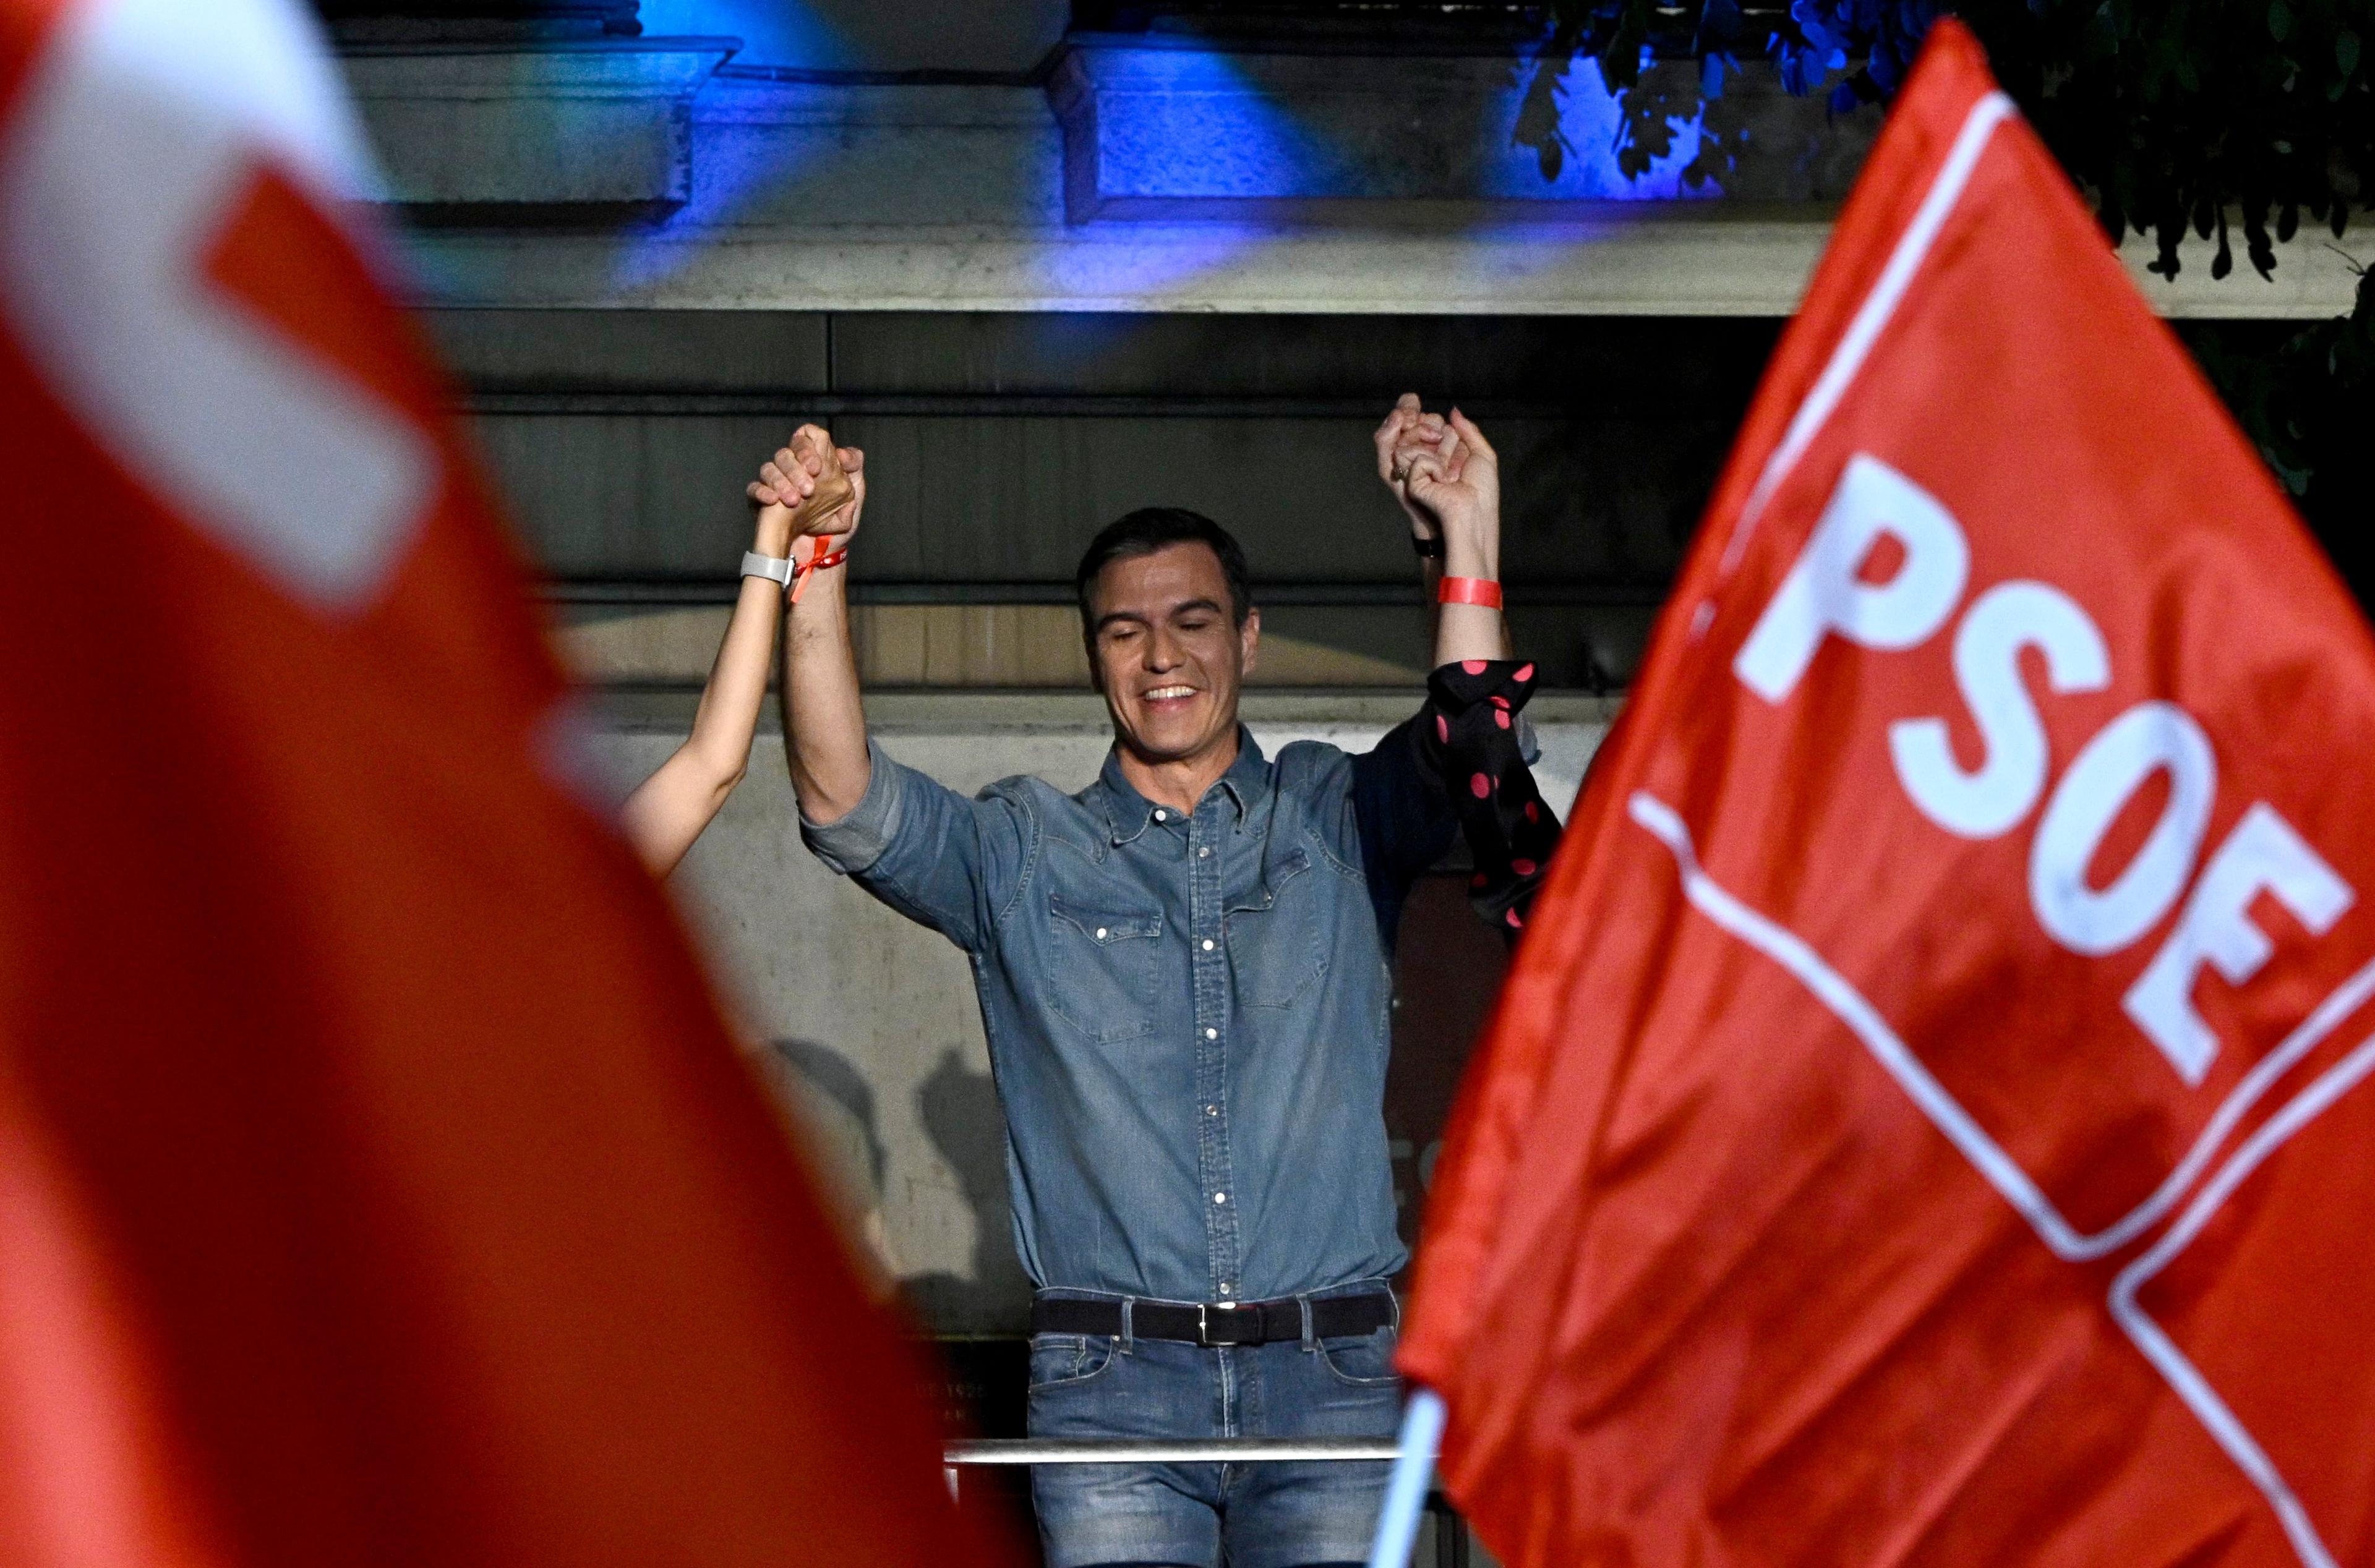 Spanish Prime Minister and Socialist Party (PSOE) candidate for re-election Pedro Sanchez and PSOE members celebrate after Spain's general election at the Spanish Socialist Party (PSOE) headquarters in Madrid on July 23, 2023. - The Spanish right is only just slightly ahead of the socialists of Prime Minister Pedro Sanchez, who maintains a chance to stay in power through the game of alliances, according on partial results following Spain's general election. (Photo by JAVIER SORIANO / AFP)